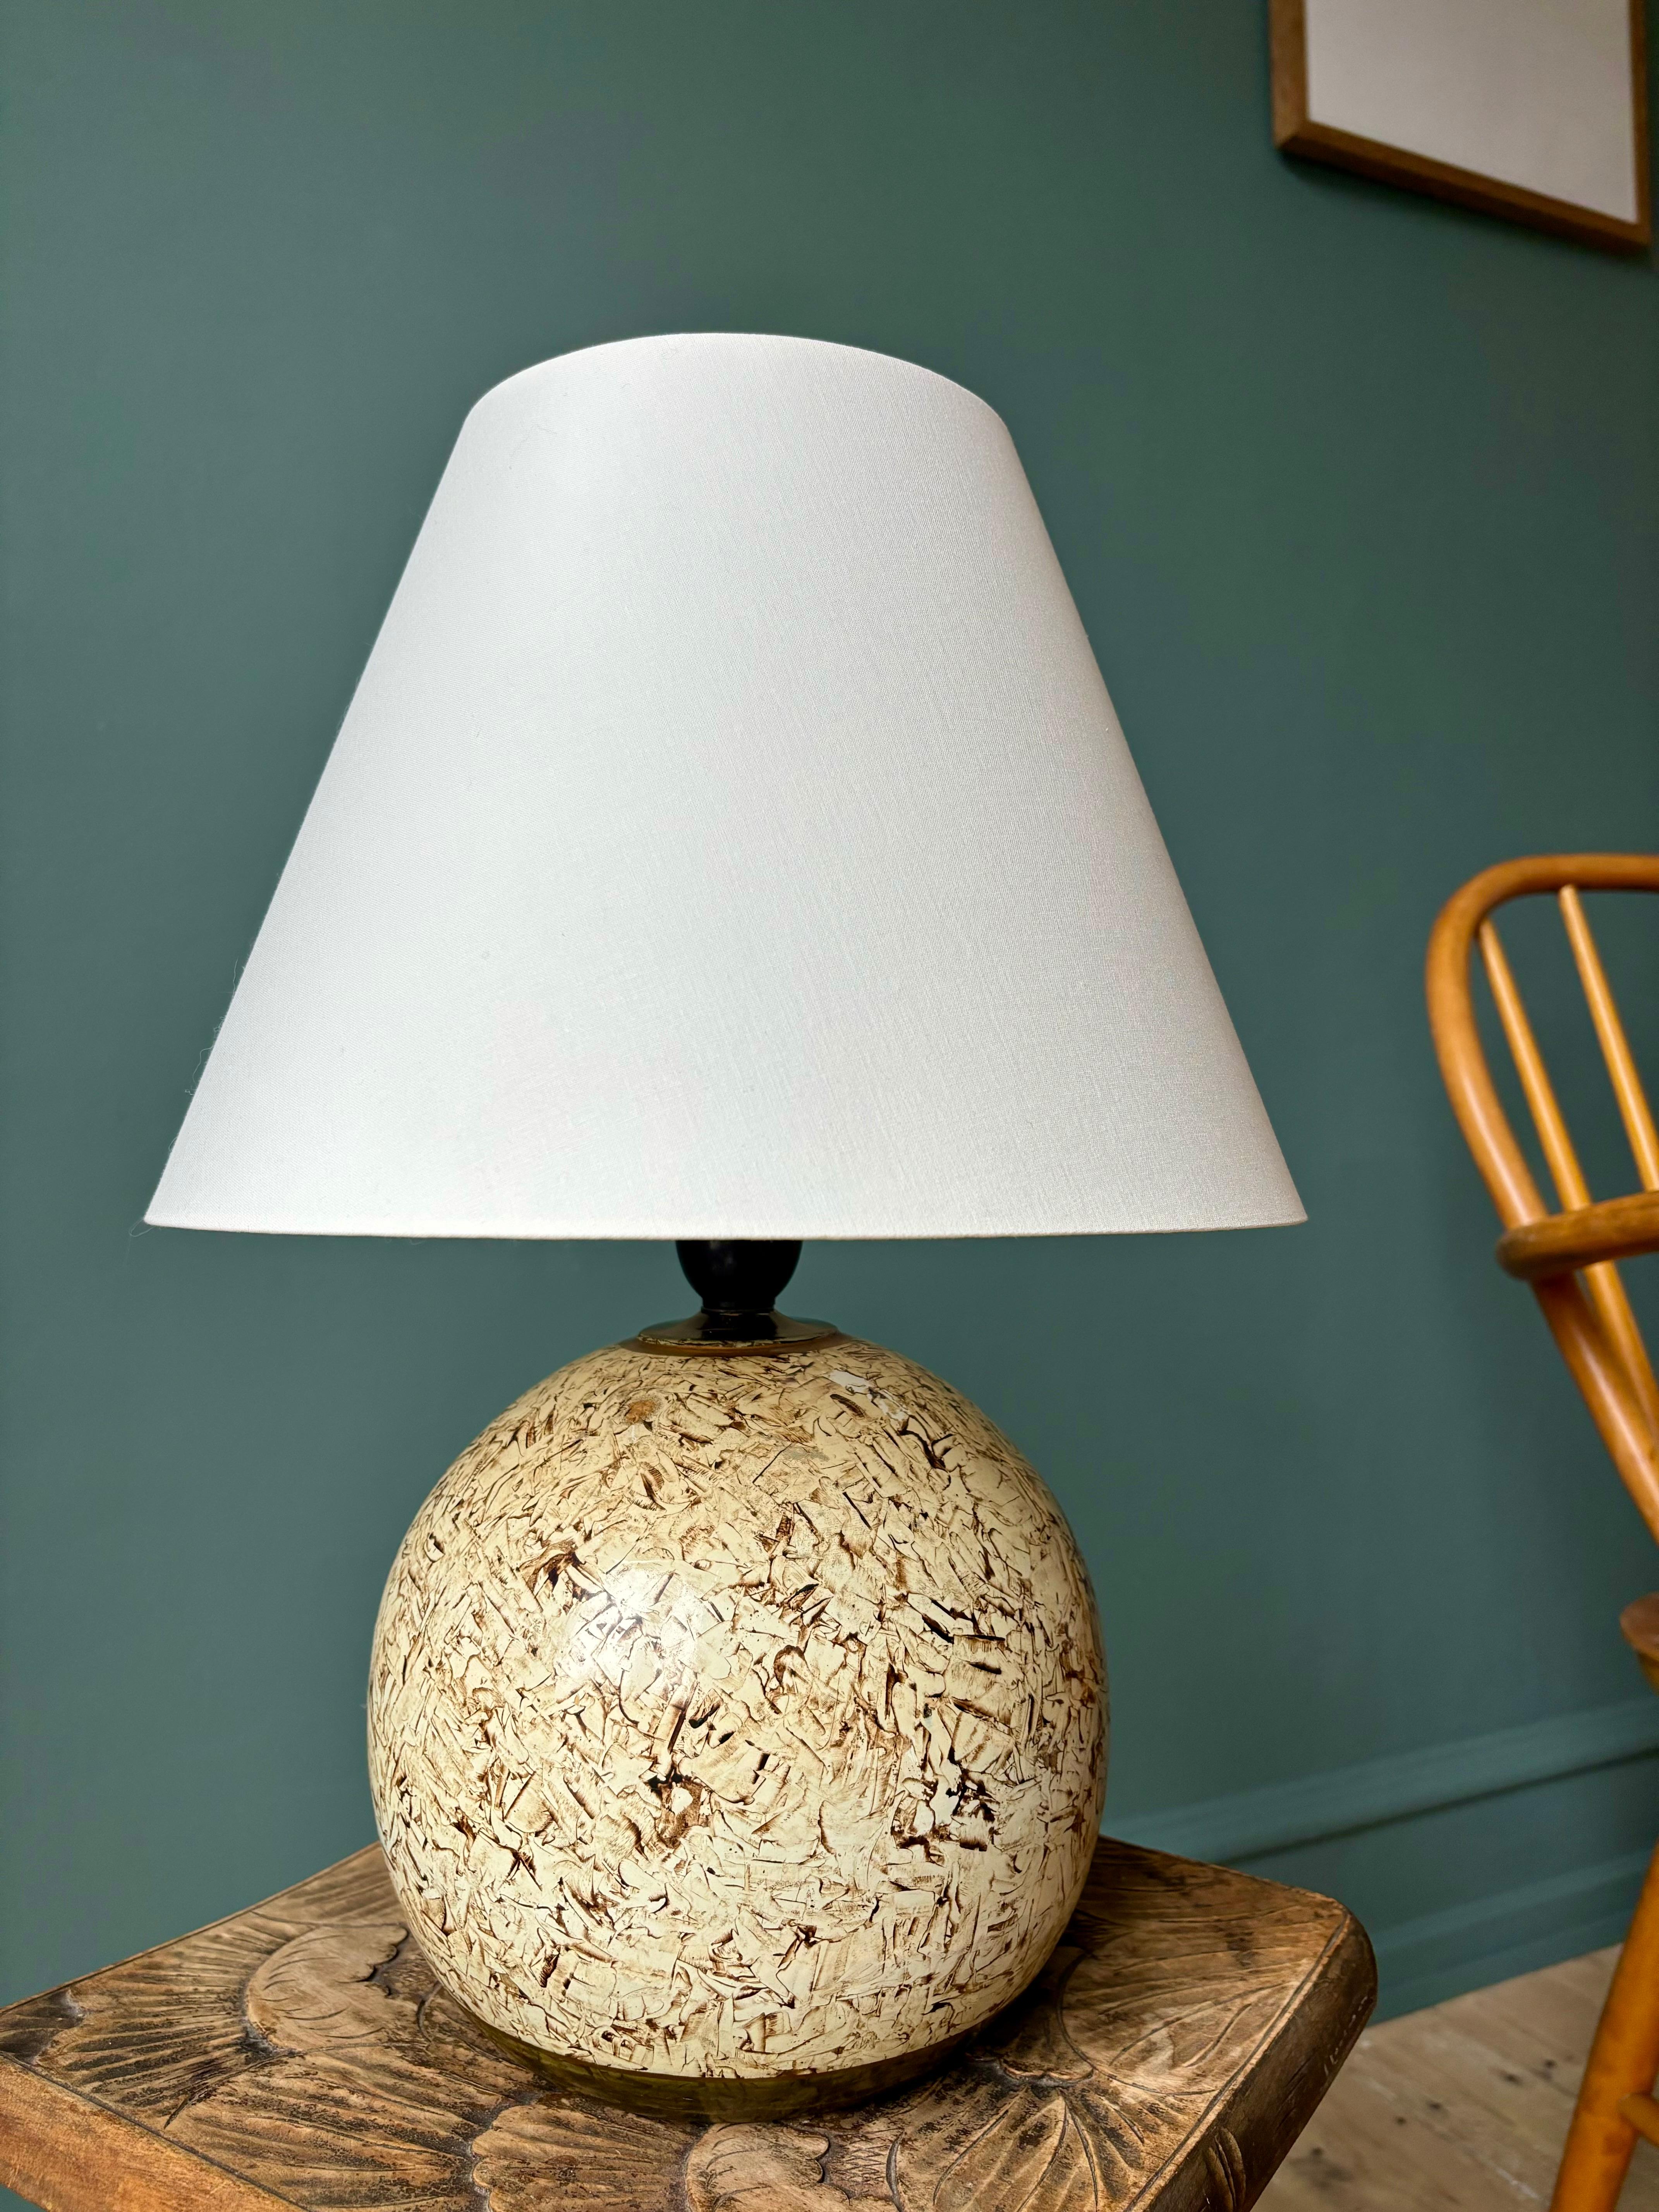 Extraordinary globe shaped ceramic table lamp in warm brown, light yellow, olive green and golden colors. Intricate hand-painted organic decor paper-like to the touch. Rewired with original fitting with switch. Great vintage condition consistent